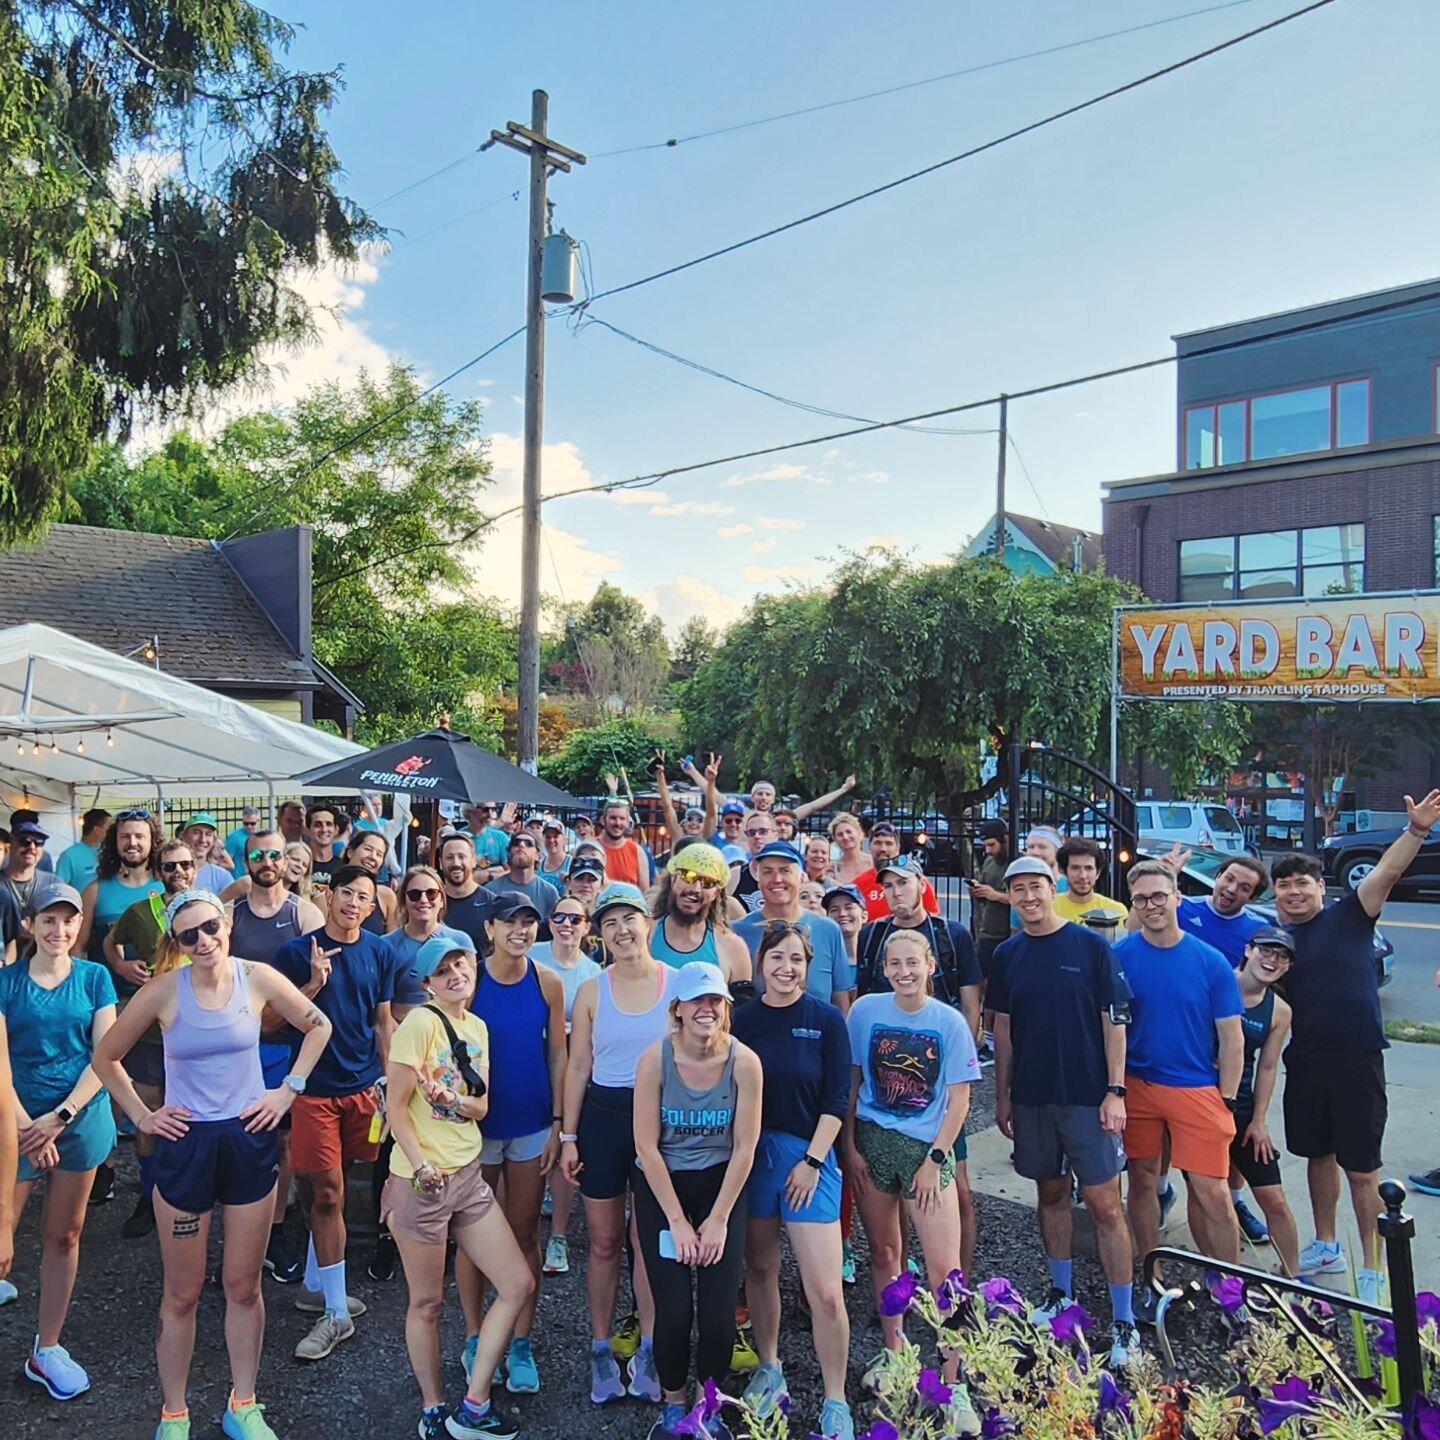 Soo much closer to running in full light. And sunnier days are ahead! 

We're at @yardbar_pdx this week. Come join us for our 5k/10k runs (taper week for Shamrock!). 6:30pm meet, 6:45pm step off. 🍻